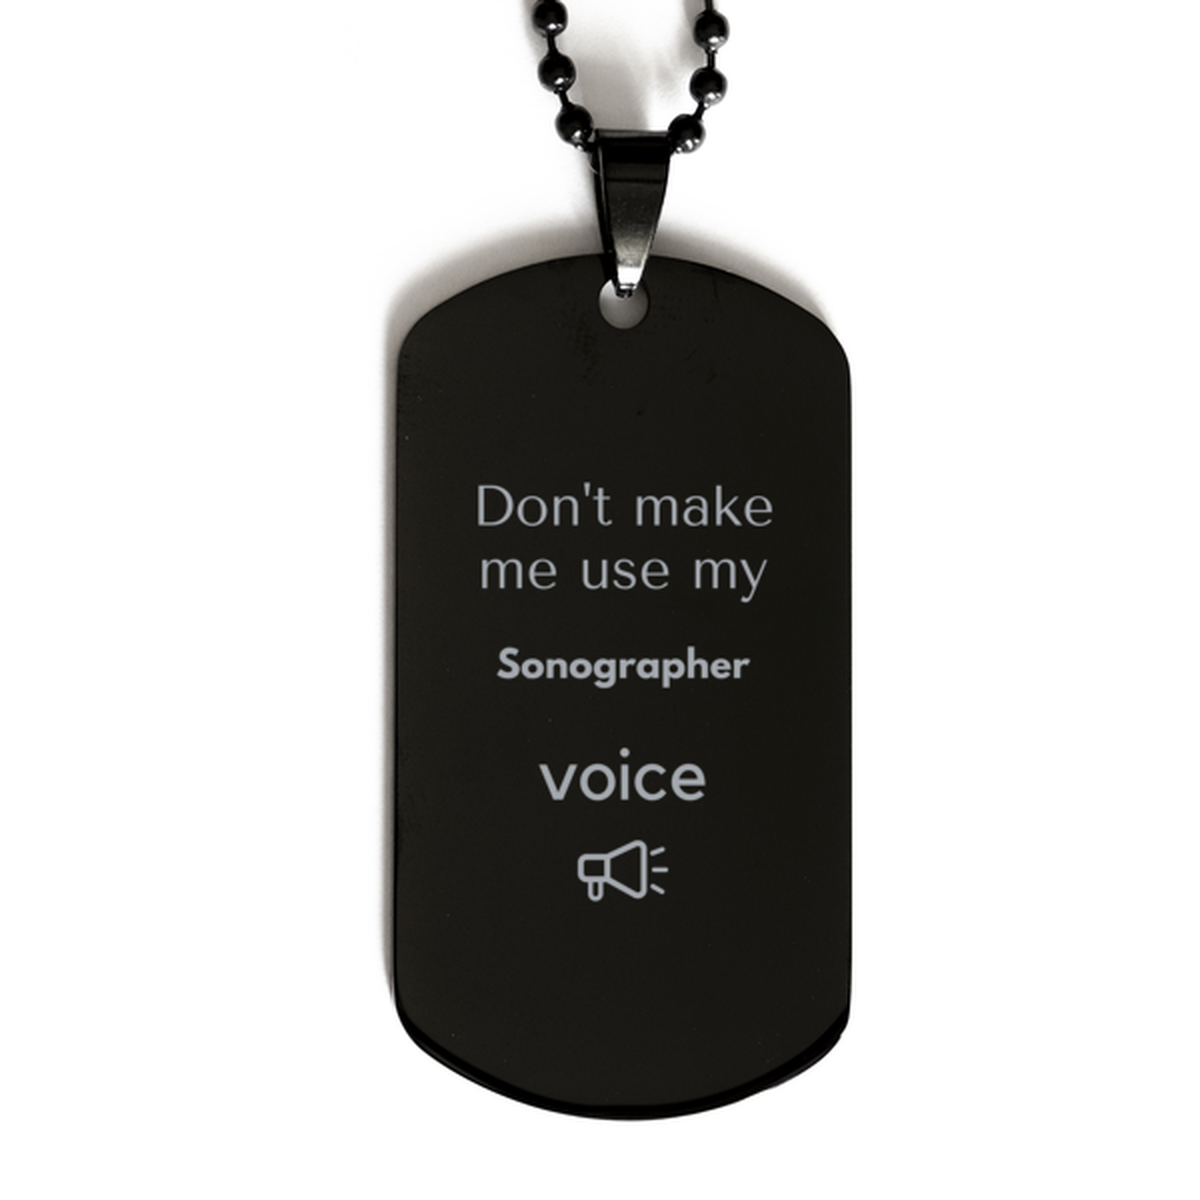 Don't make me use my Sonographer voice, Sarcasm Sonographer Gifts, Christmas Sonographer Black Dog Tag Birthday Unique Gifts For Sonographer Coworkers, Men, Women, Colleague, Friends